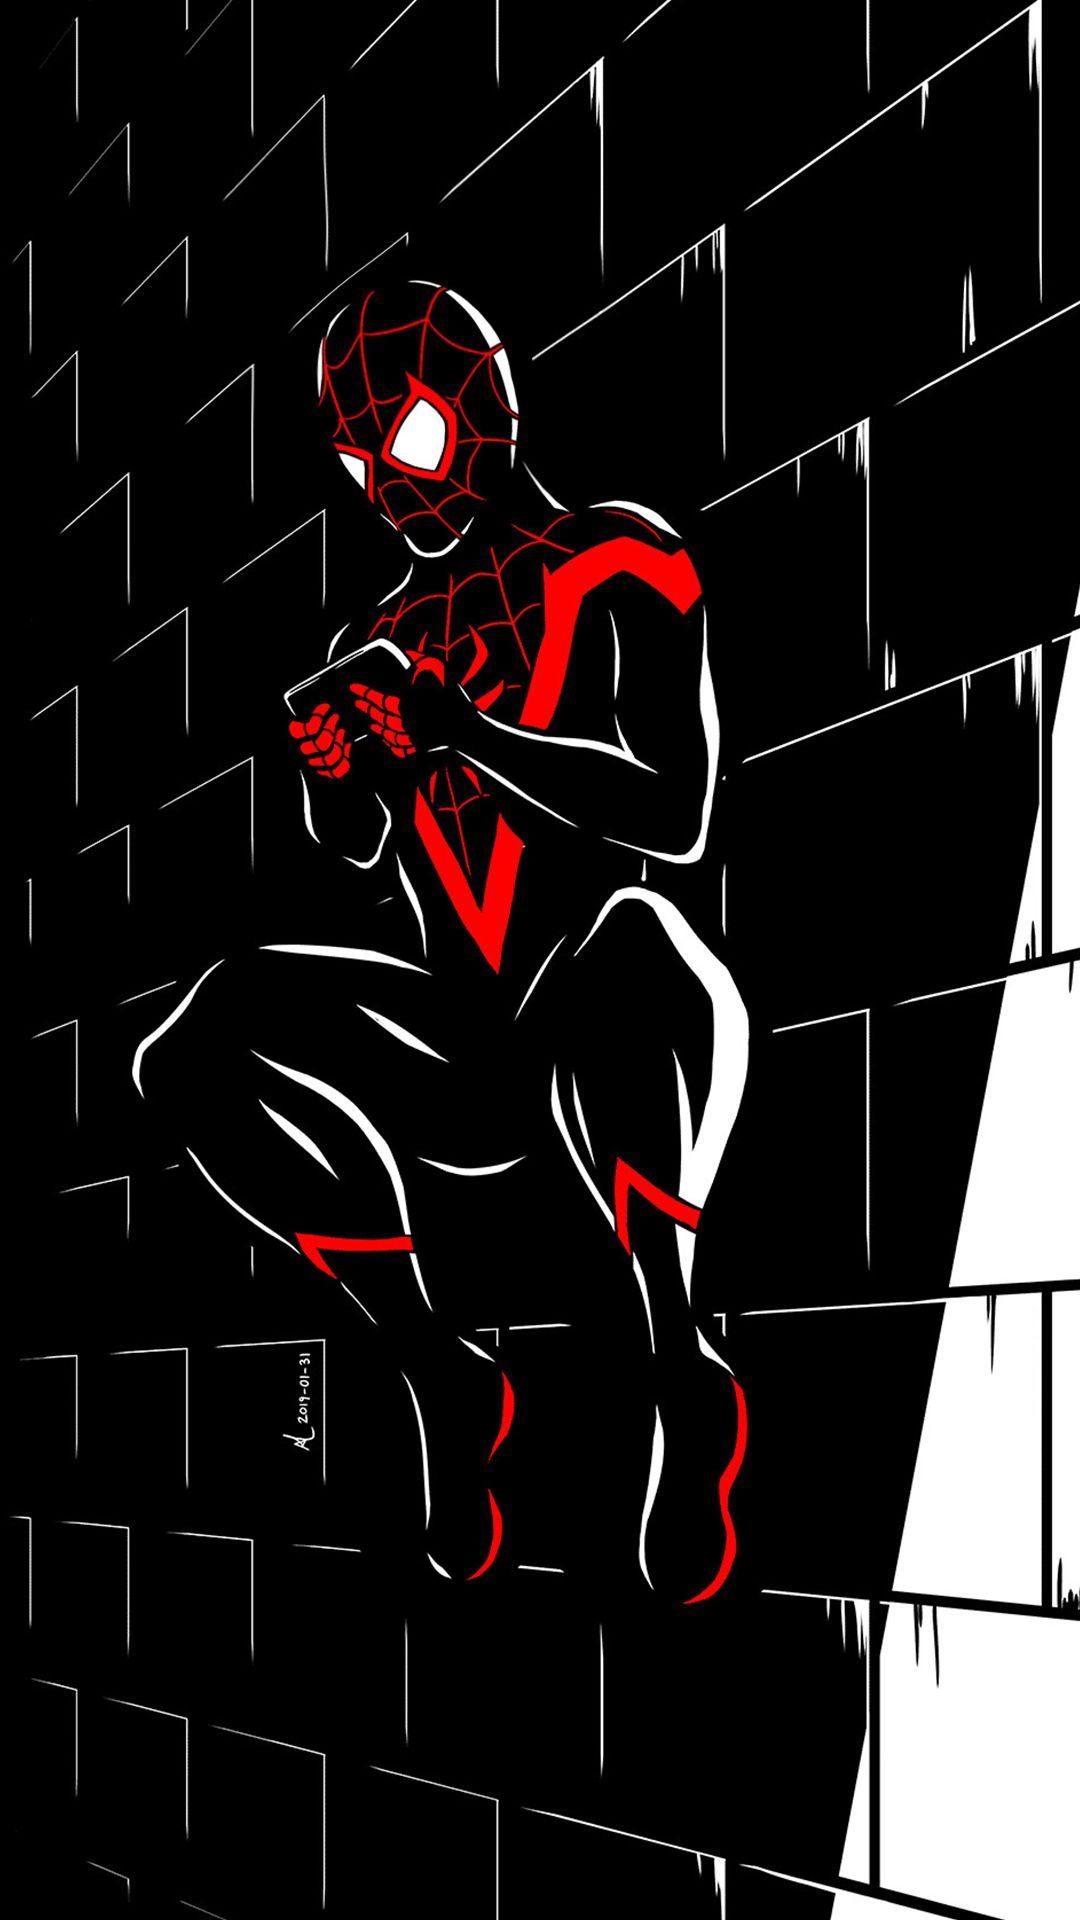 Spider man Miles Morales Into the spider verse marvel ultimate. Spiderman poster, Spiderman sketches, Spiderman fight